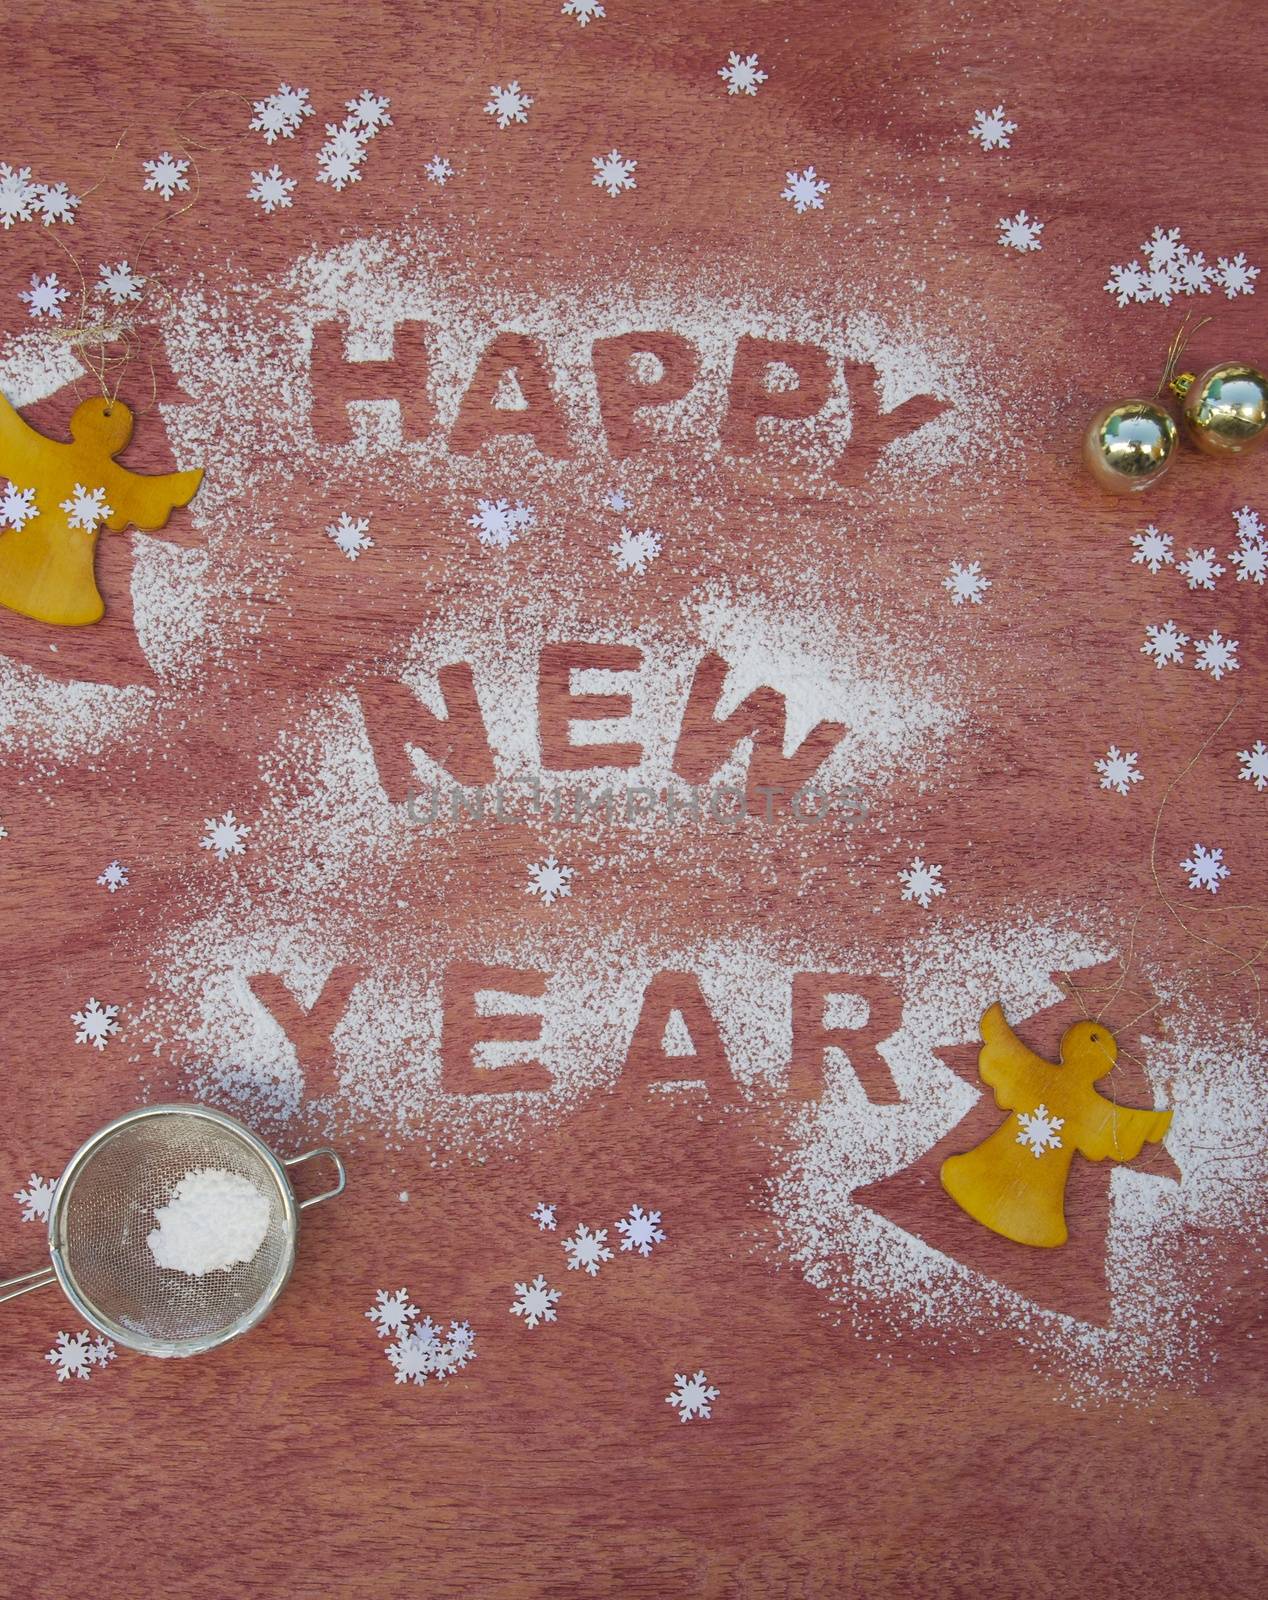 New Year's Day background with an inscription: "Happy New Year"